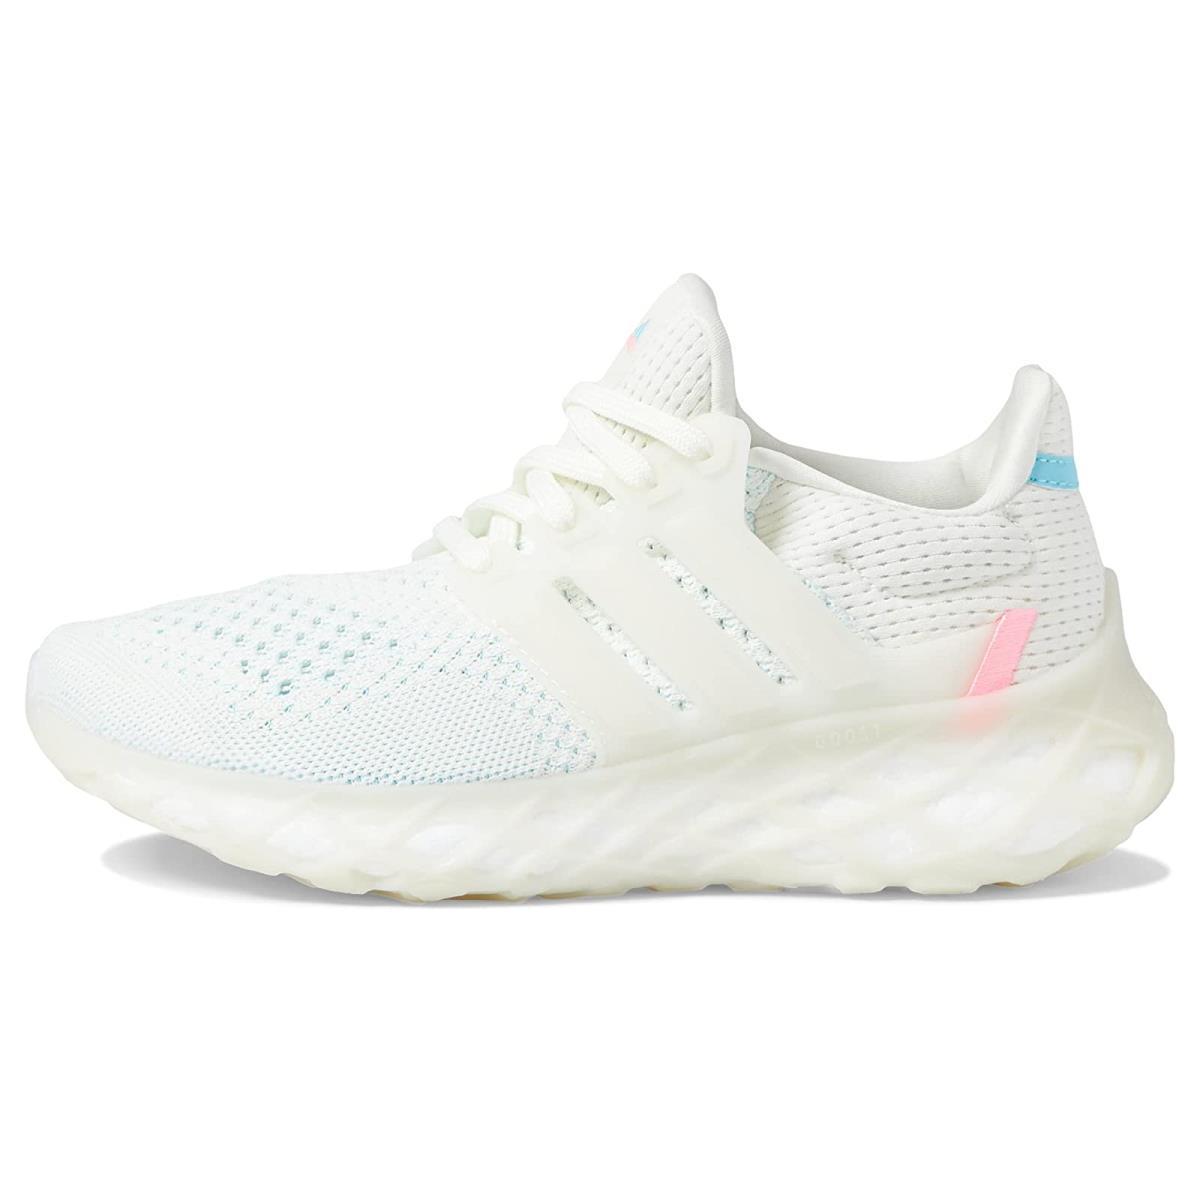 Adidas shoes  - Ink/Bliss Blue/Beam Pink 2